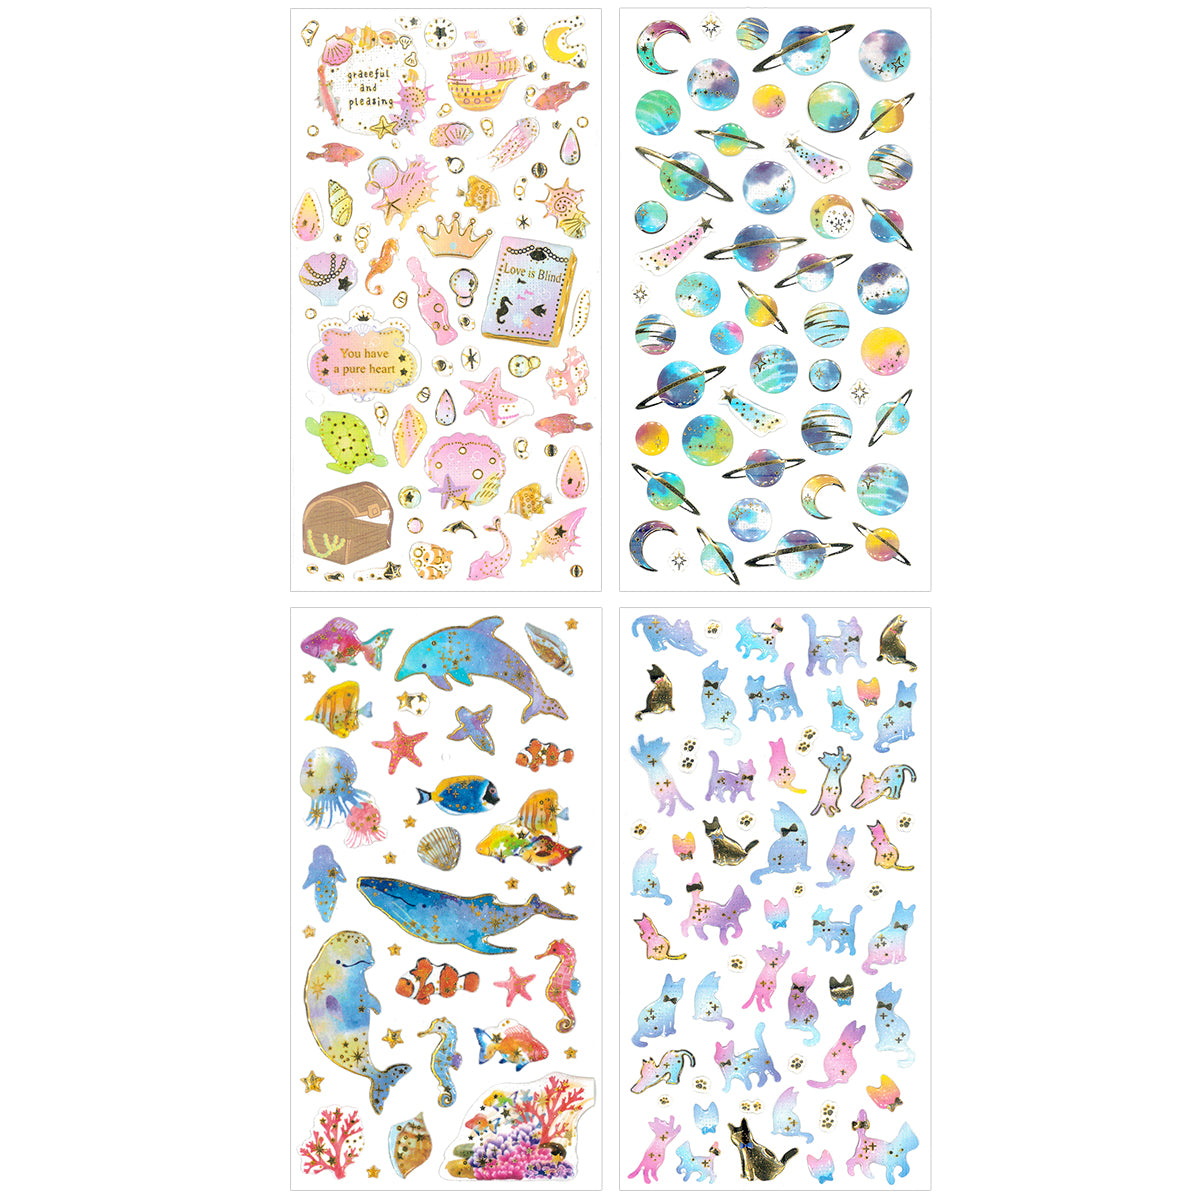 Wrapables 3D Epoxy Stickers for Scrapbooking, Journal, Planner, Decals for Phone or Notebook (4 Sheets)